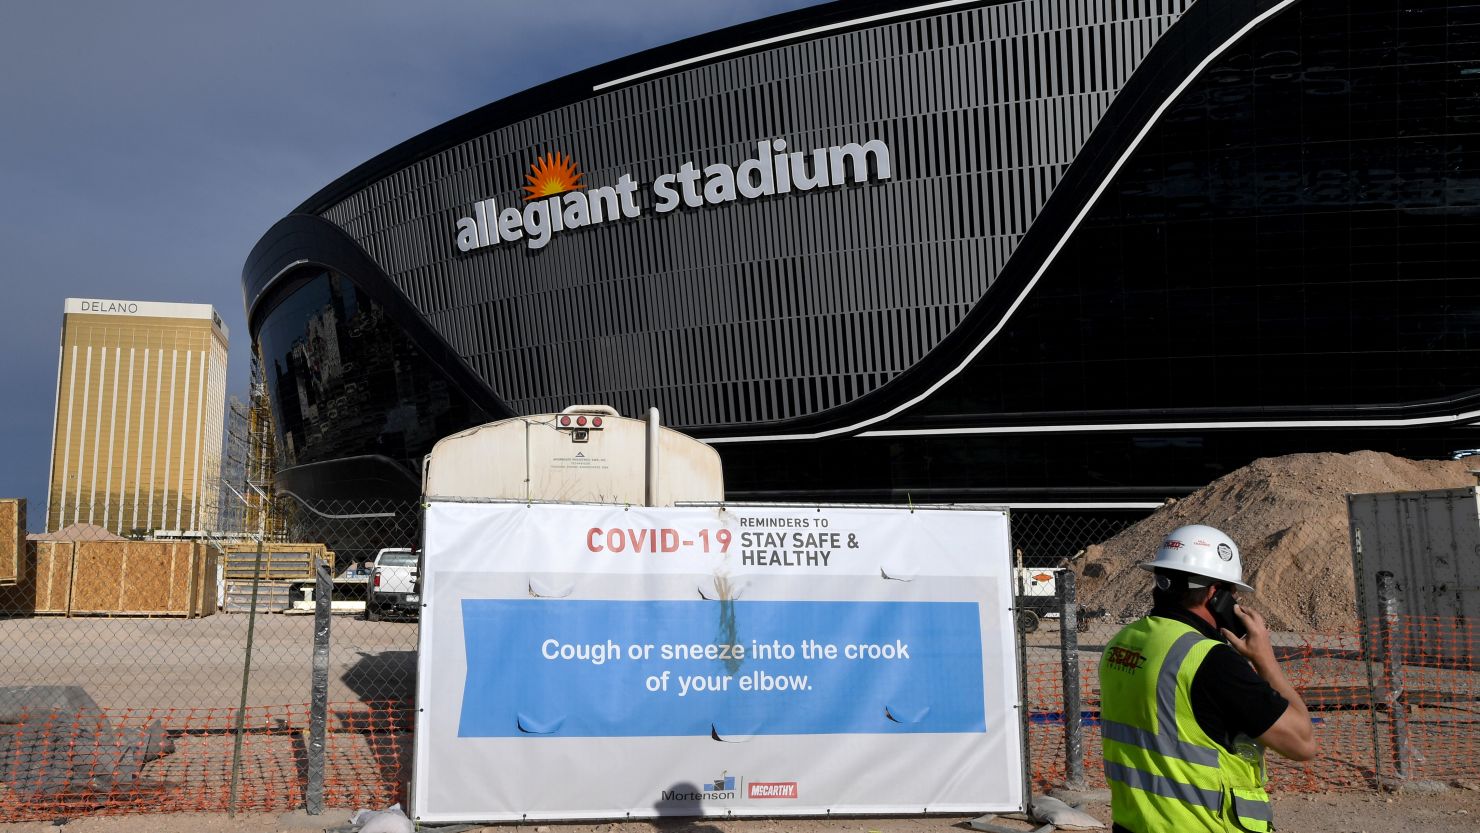 A sign with guidelines for how to stay safe from the coronavirus is posted on a fence at Allegiant Stadium, the future home of the Las Vegas Raiders, in Las Vegas, Nevada.